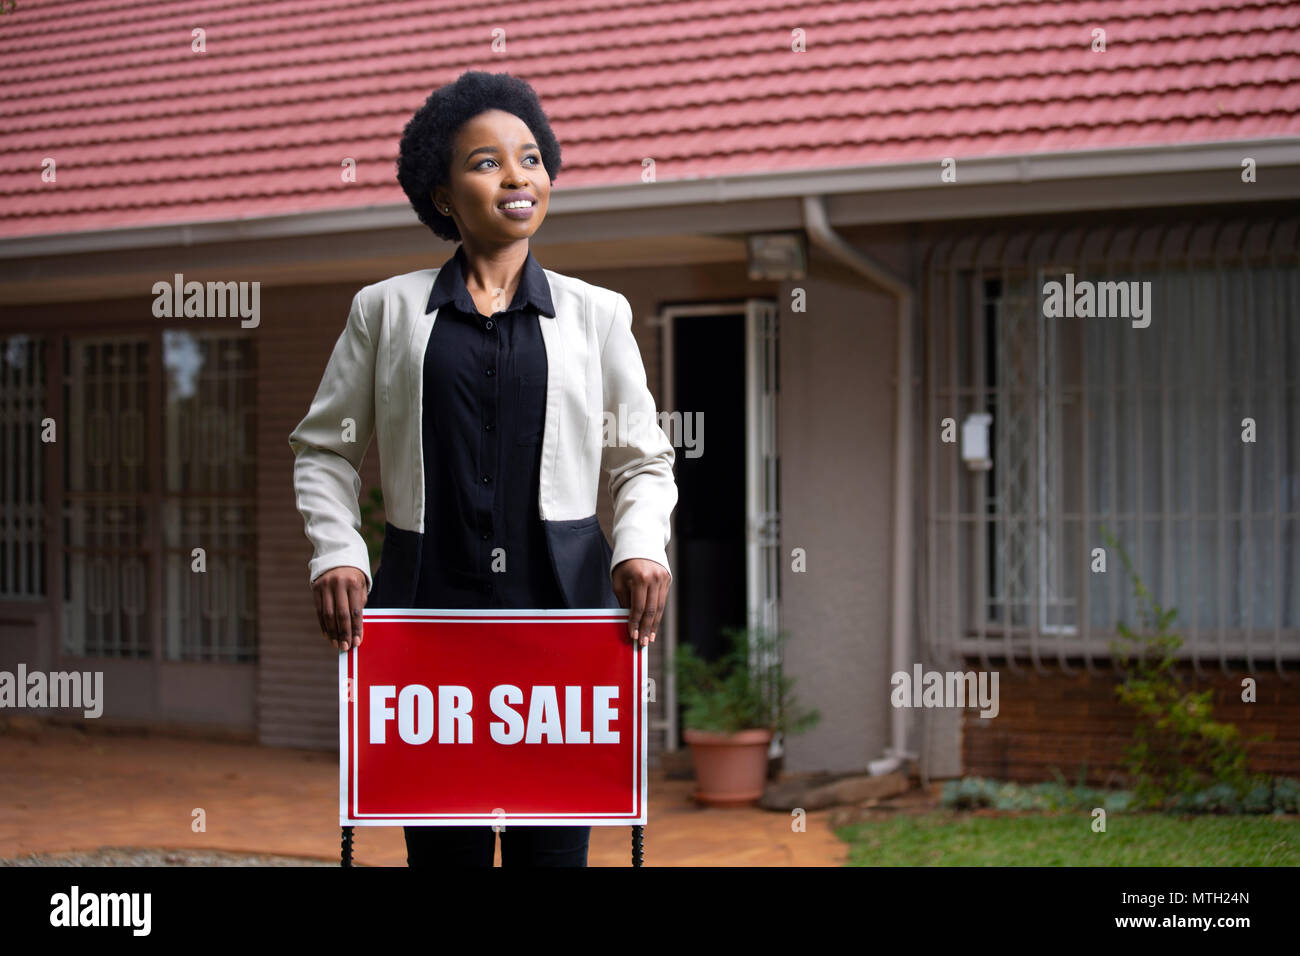 Estate agent holding For Sale sign in front of house Stock Photo